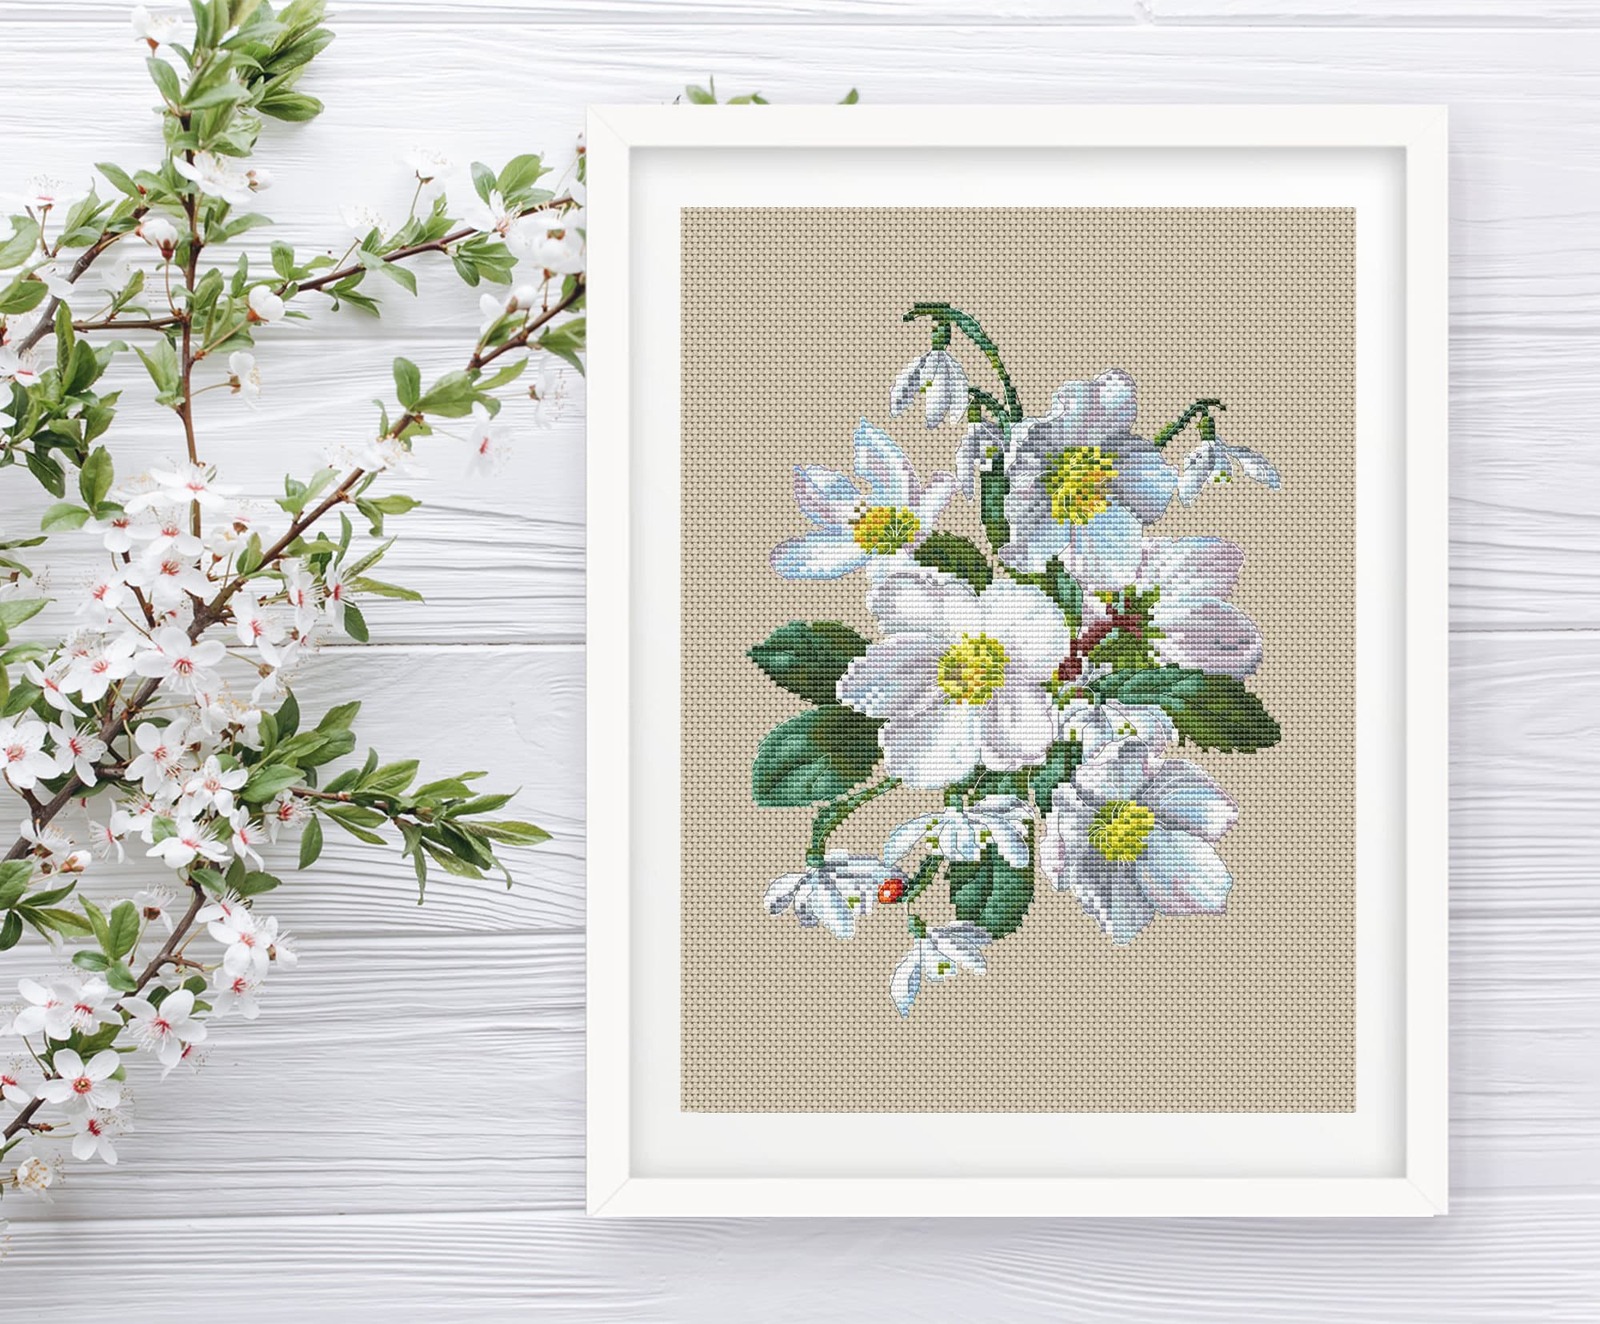 Primary image for White flowers cross stitch bouquet pattern pdf - Easy cross stitch snowdrops 